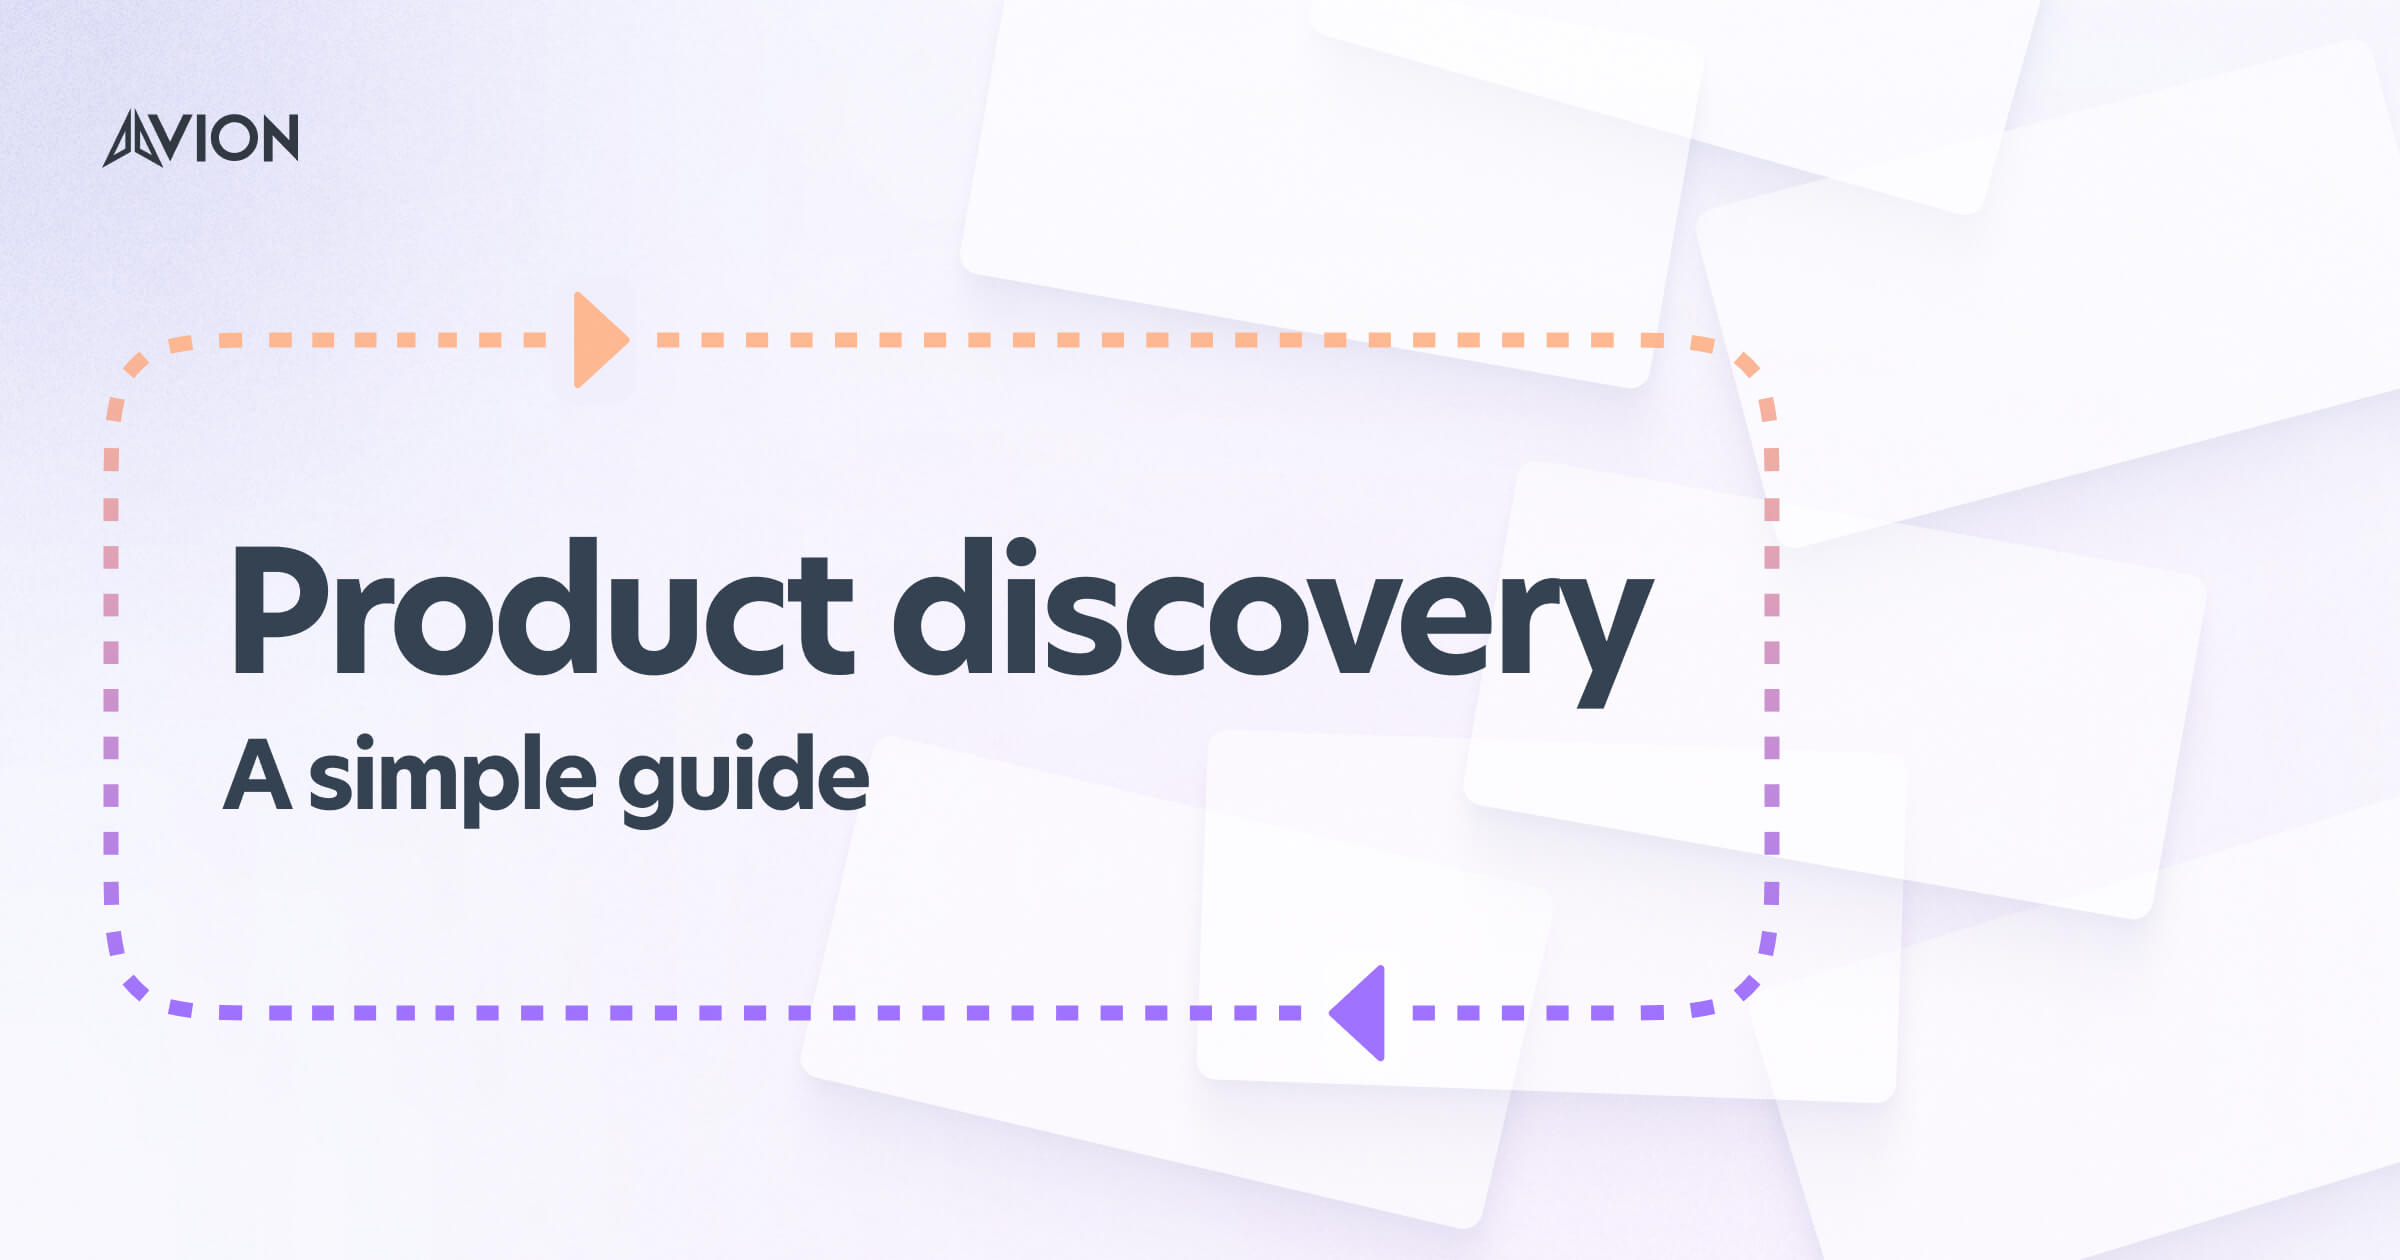 Product discovery guide — a simple breakdown and guid eot product discovery, with examples